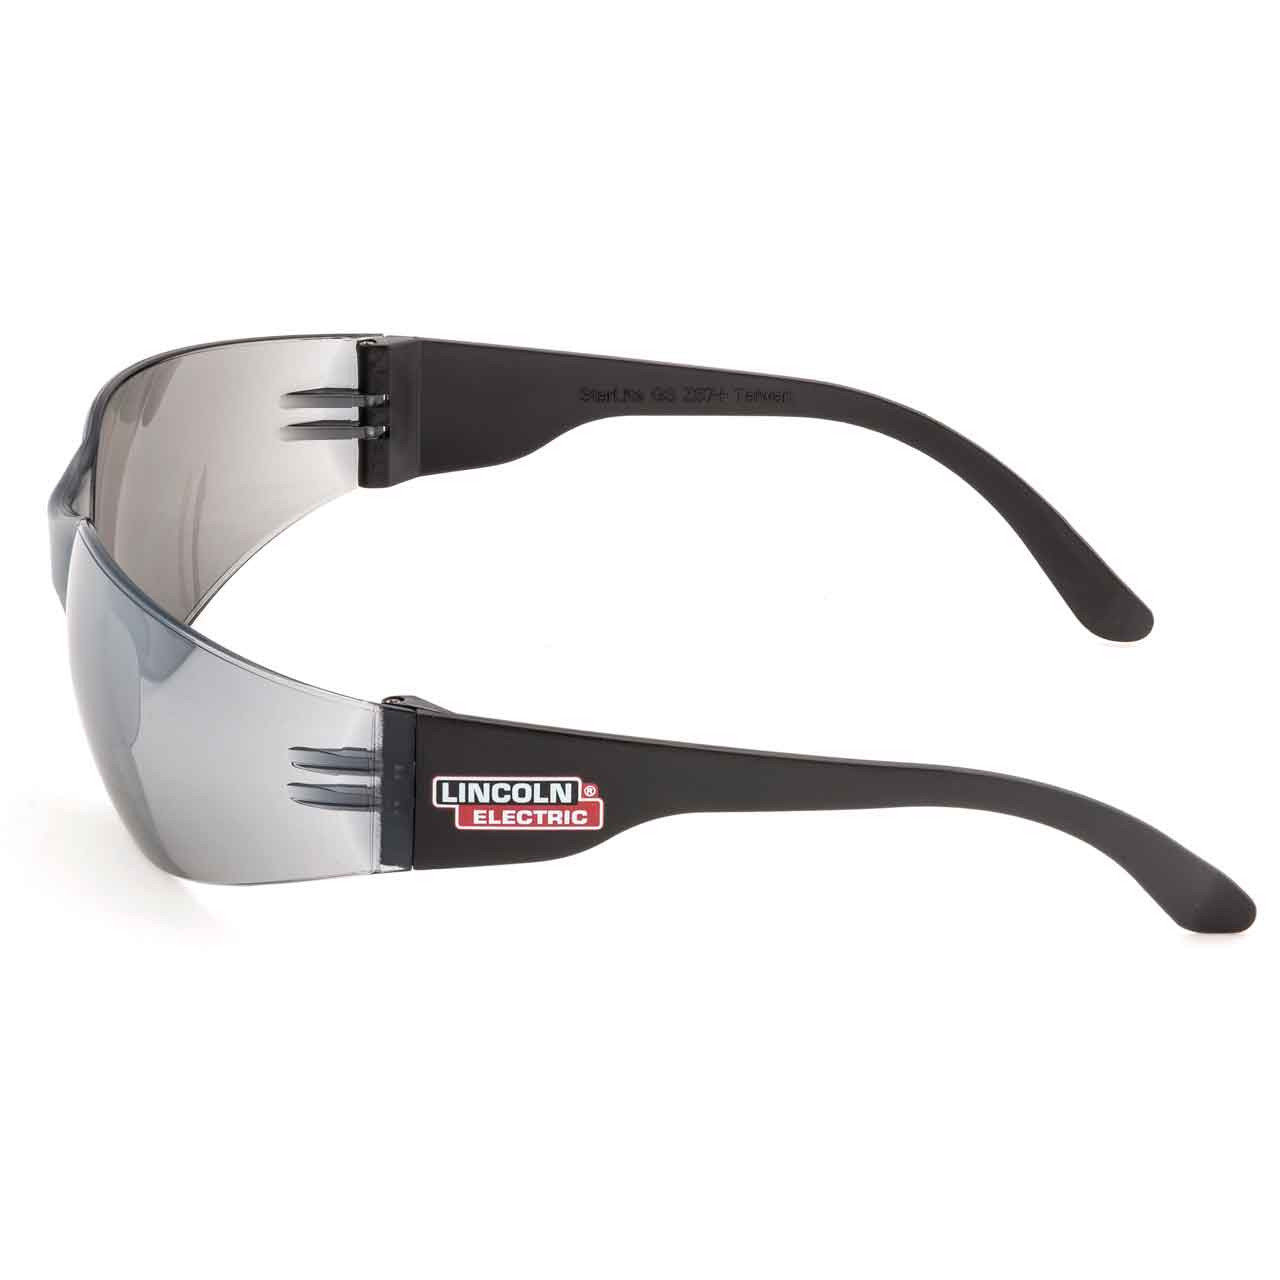 Lincoln Electric K2969 1 Starlite Outdoor Welding Safety Glasses